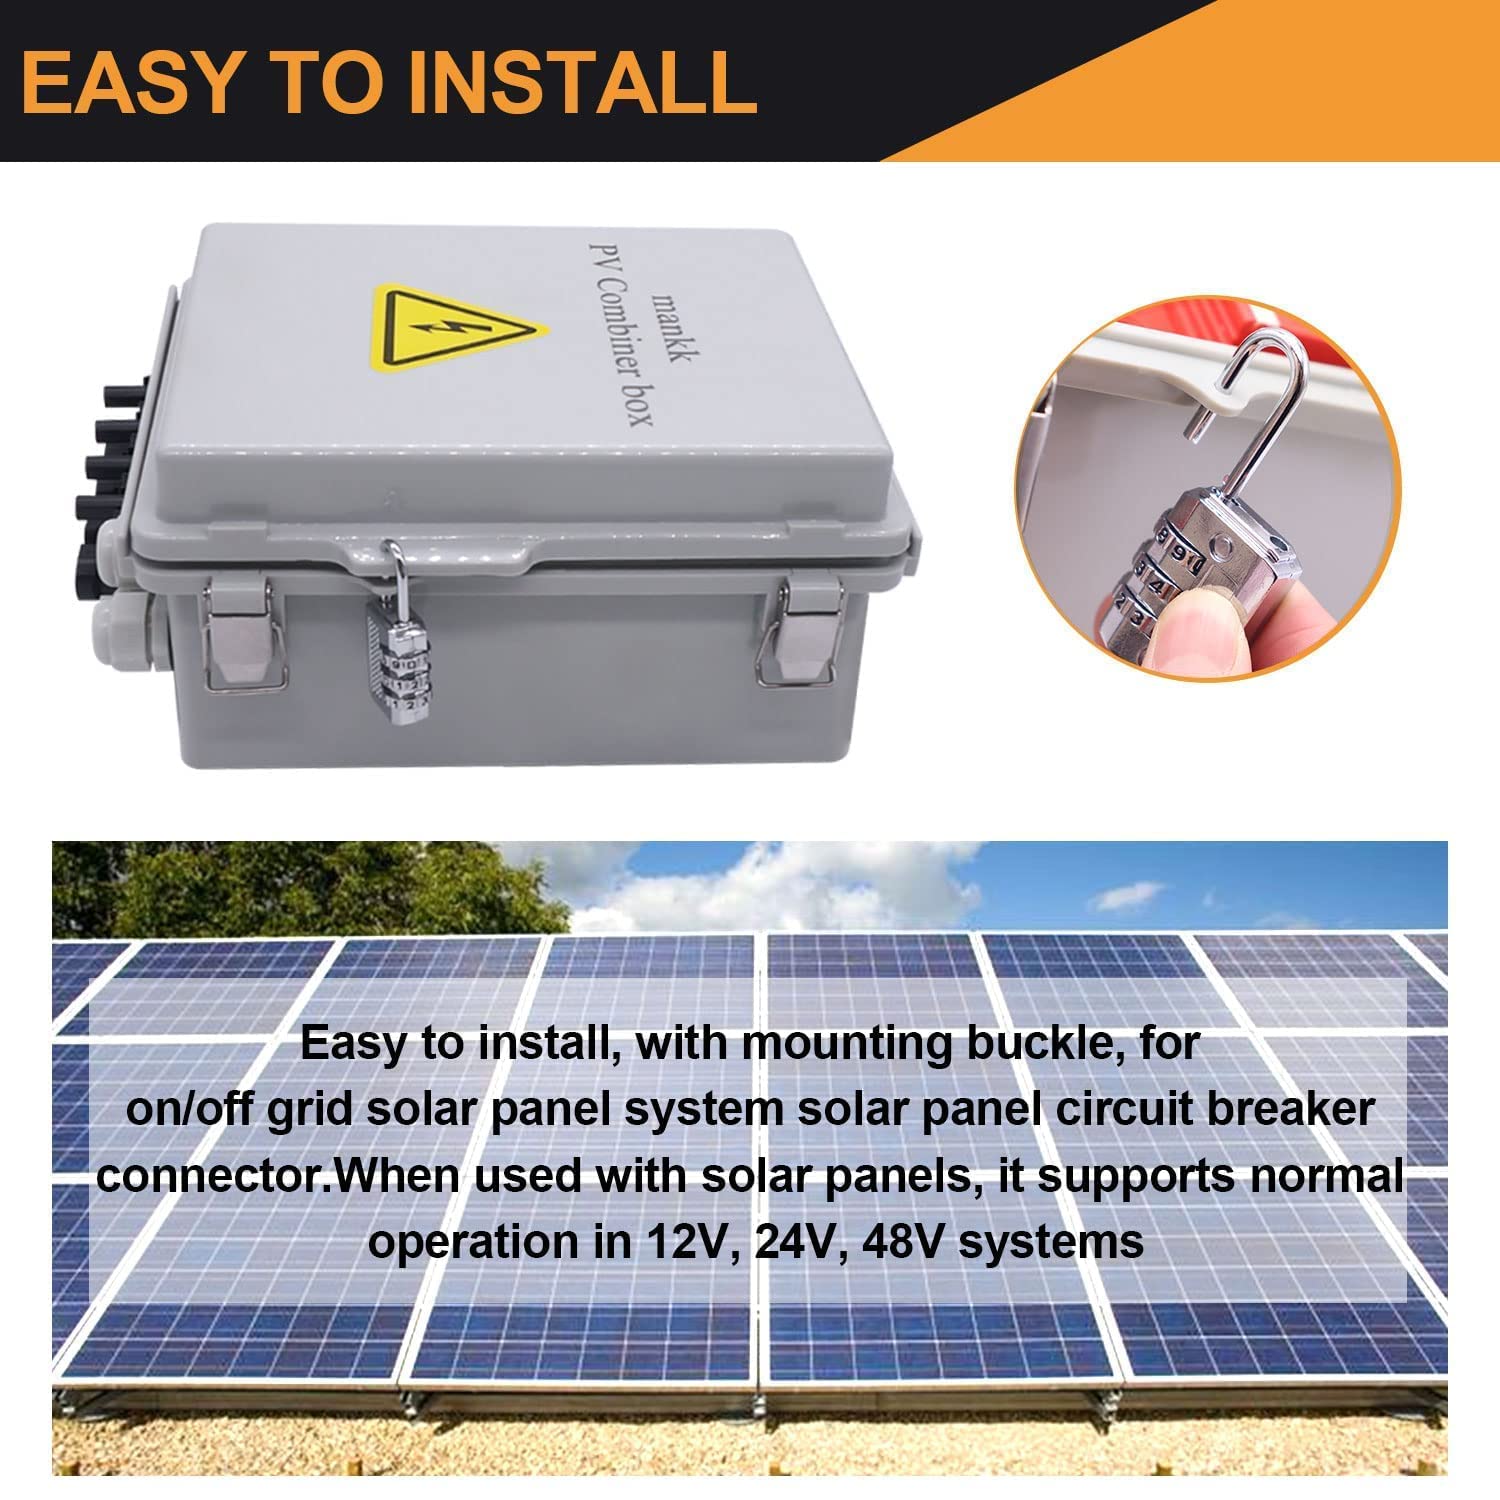 mankk 4 String PV Combiner Box IP65 Waterproof Solar Combiner Box with 63A Circuit Breaker Lightning Arreste Solar Connector and 15A Rated Current Fuse for On/Off Grid Solar Panel System PV-BOX-4X